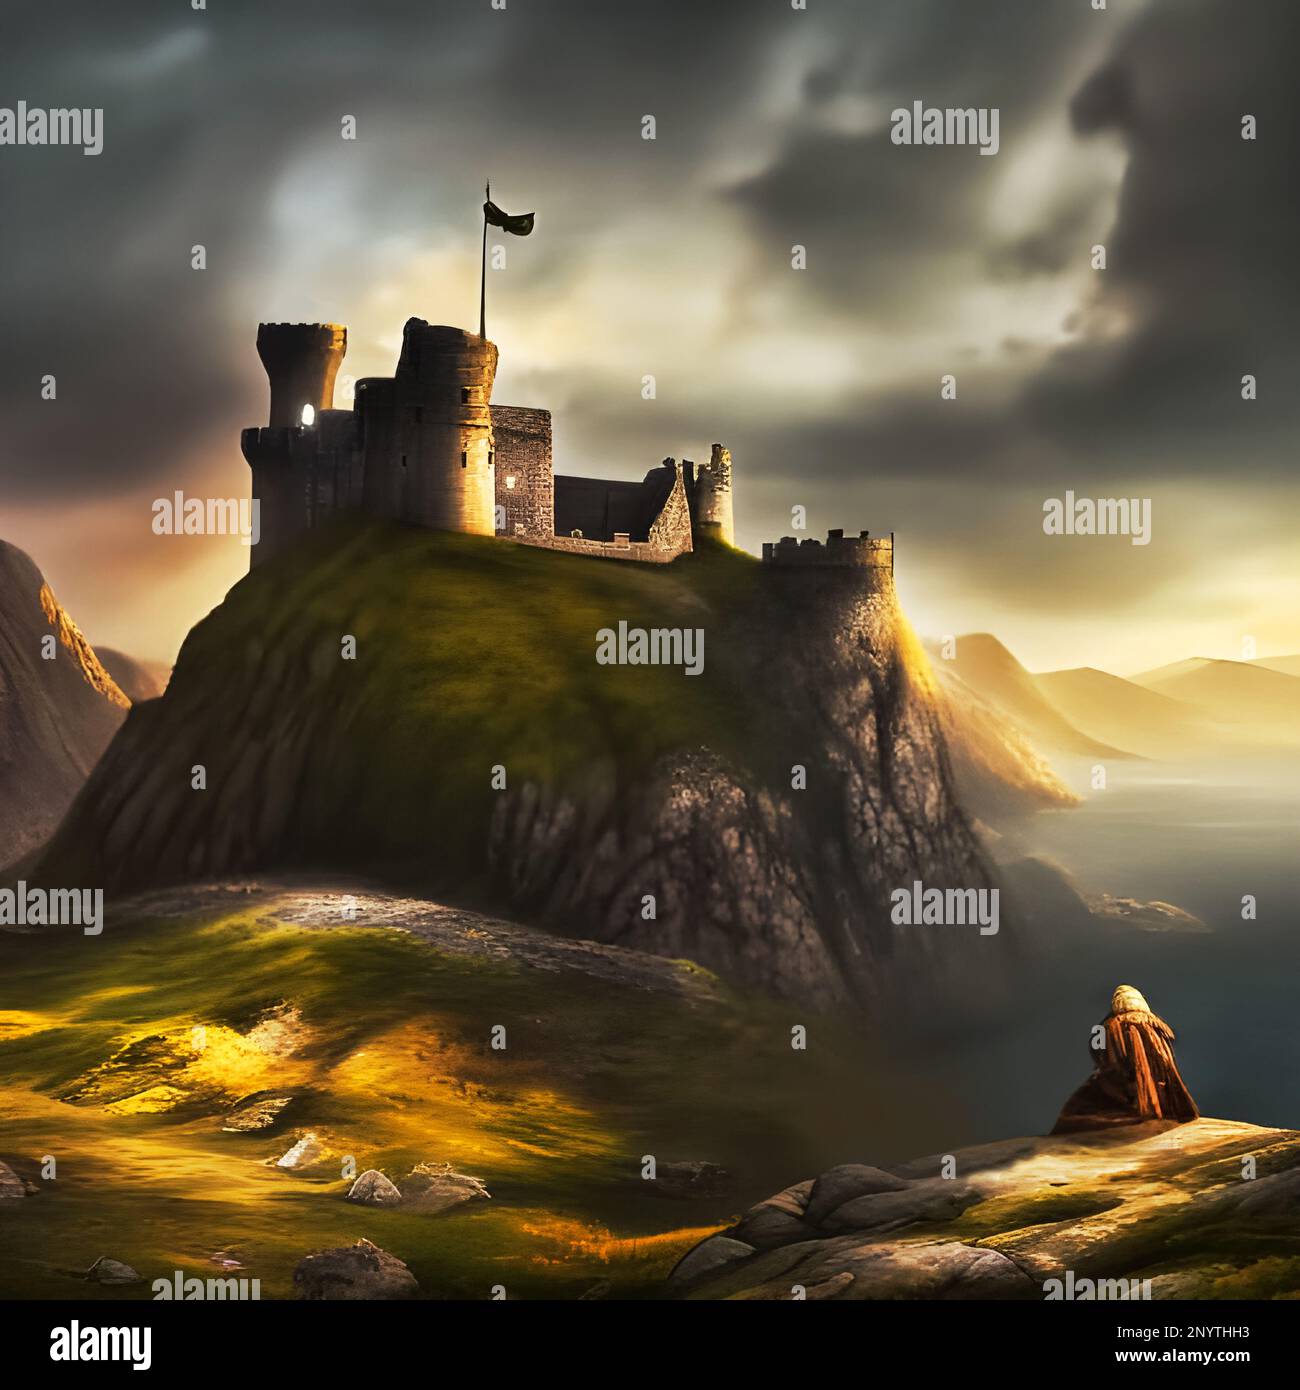 Man looking at a castle on a hill during the middle-ages depiction. Edited AI generated image Stock Photo